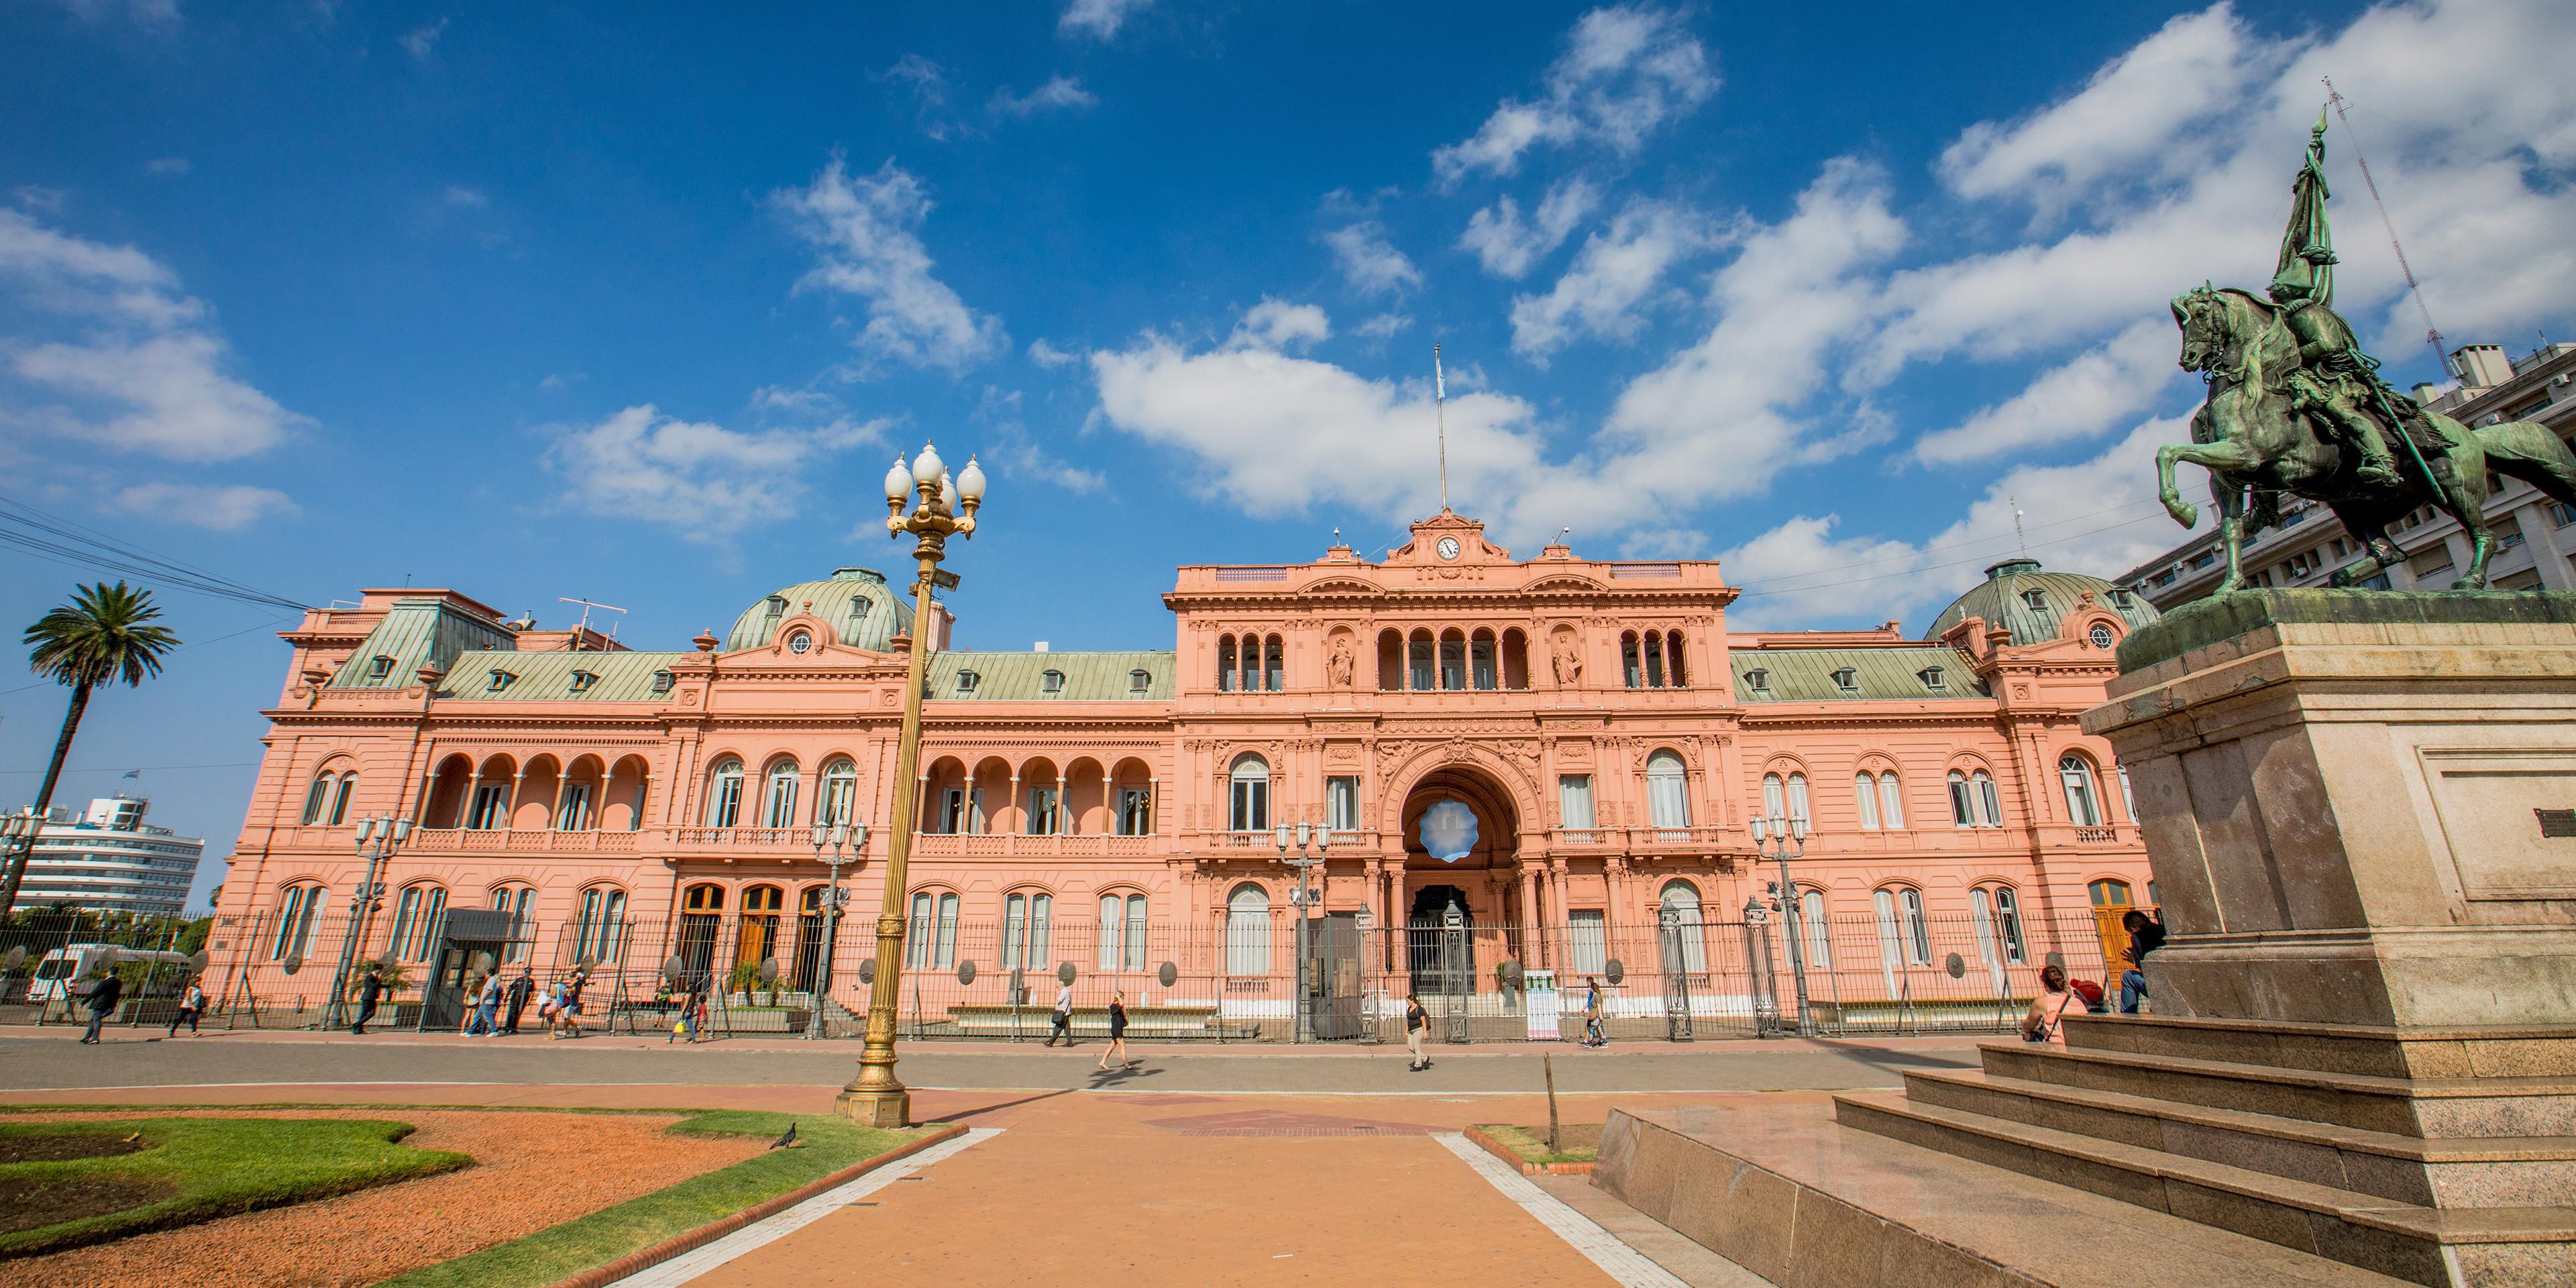 It is the house of government of Argentina and where the office of the President is located. It is emplaced in the Plaza de Mayo, one of the most recognized spaces in the country's history. There is also the Casa Rosada museum, which consists of a journey through the 200 years of Argentine history from the May Revolution of 1810 until today.